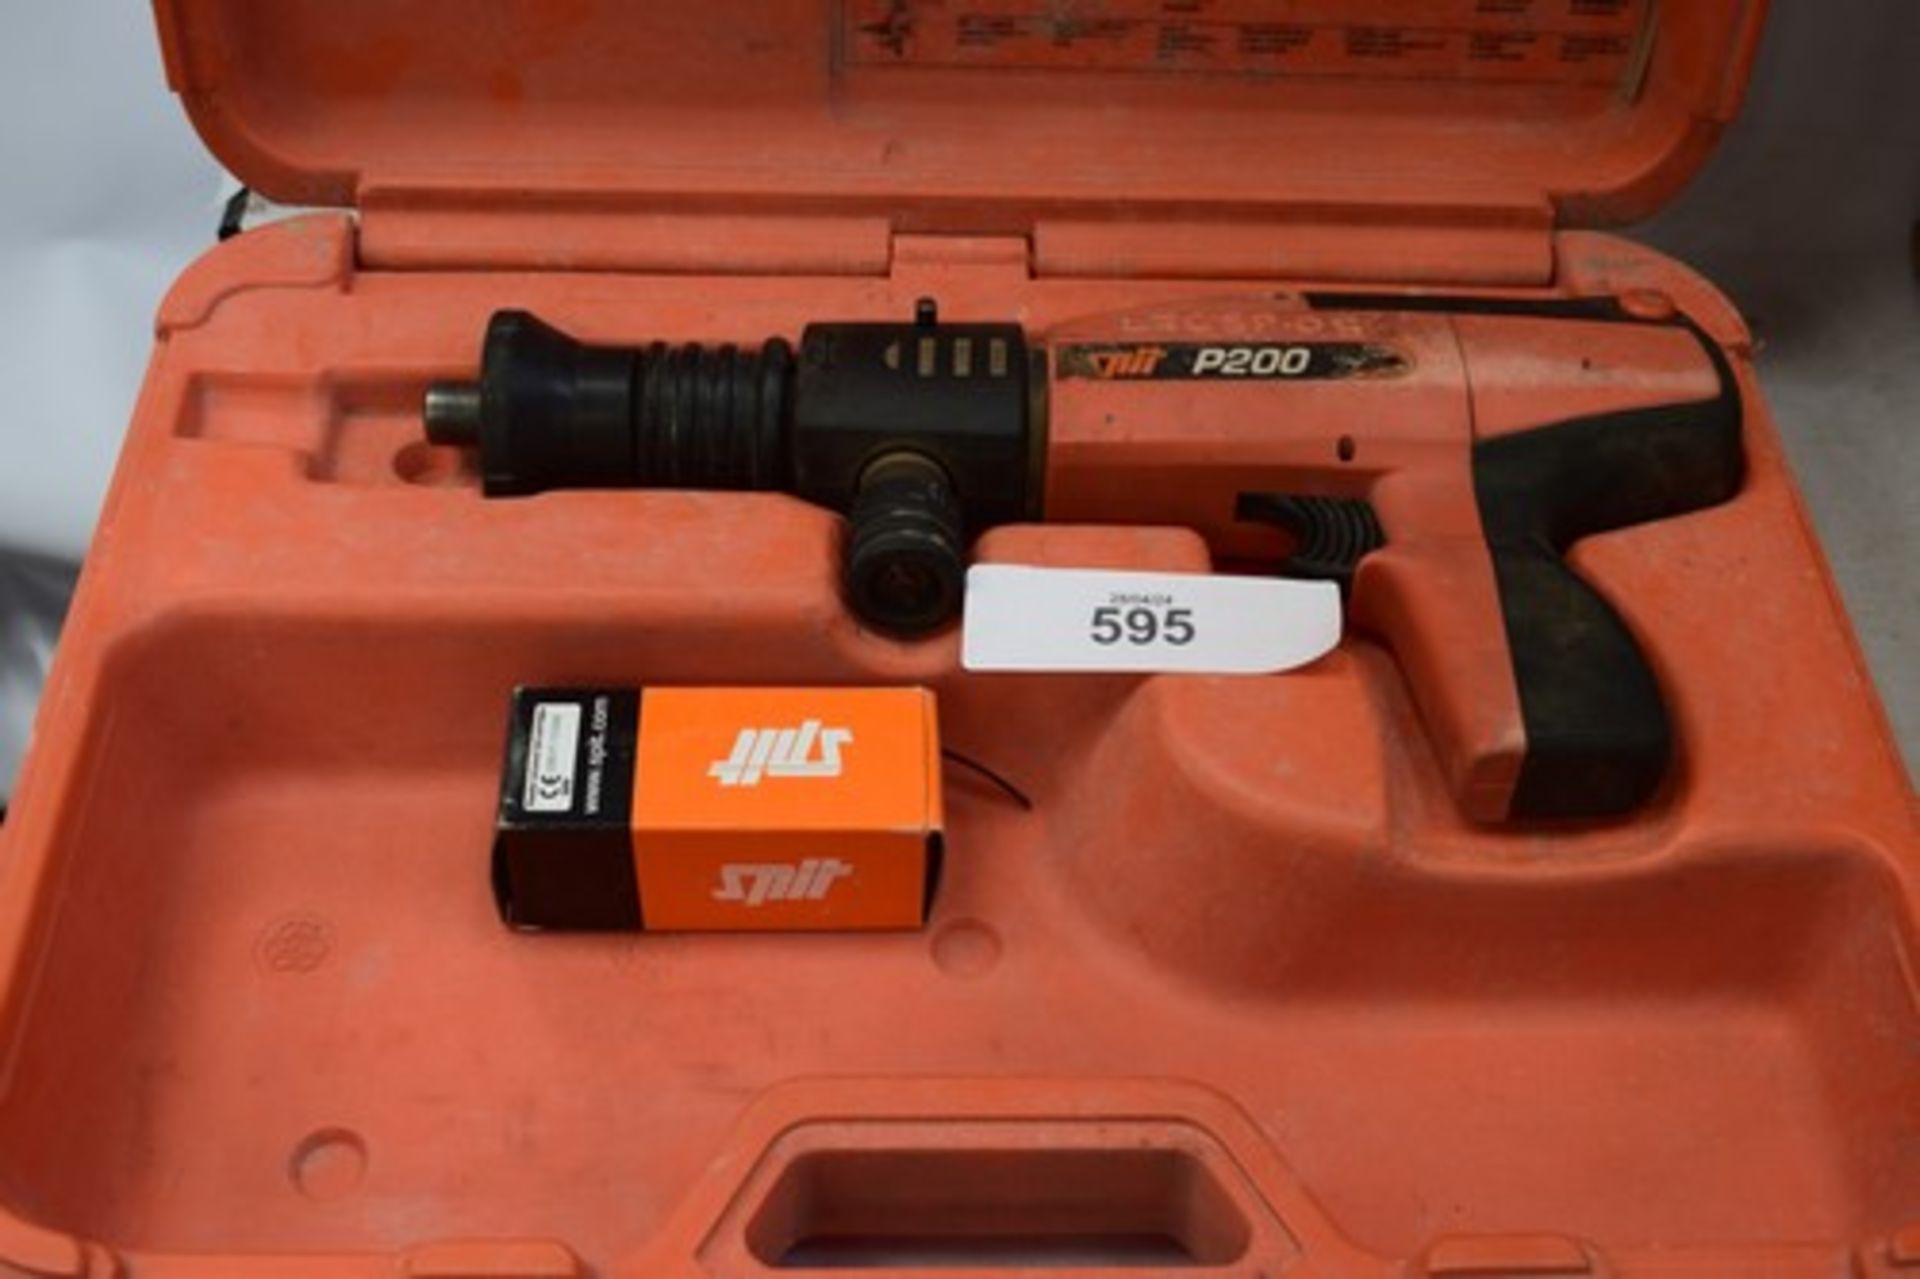 1 x Spit P200 nail gun, including small quantity of ammunition and carry case - second-hand (SW)